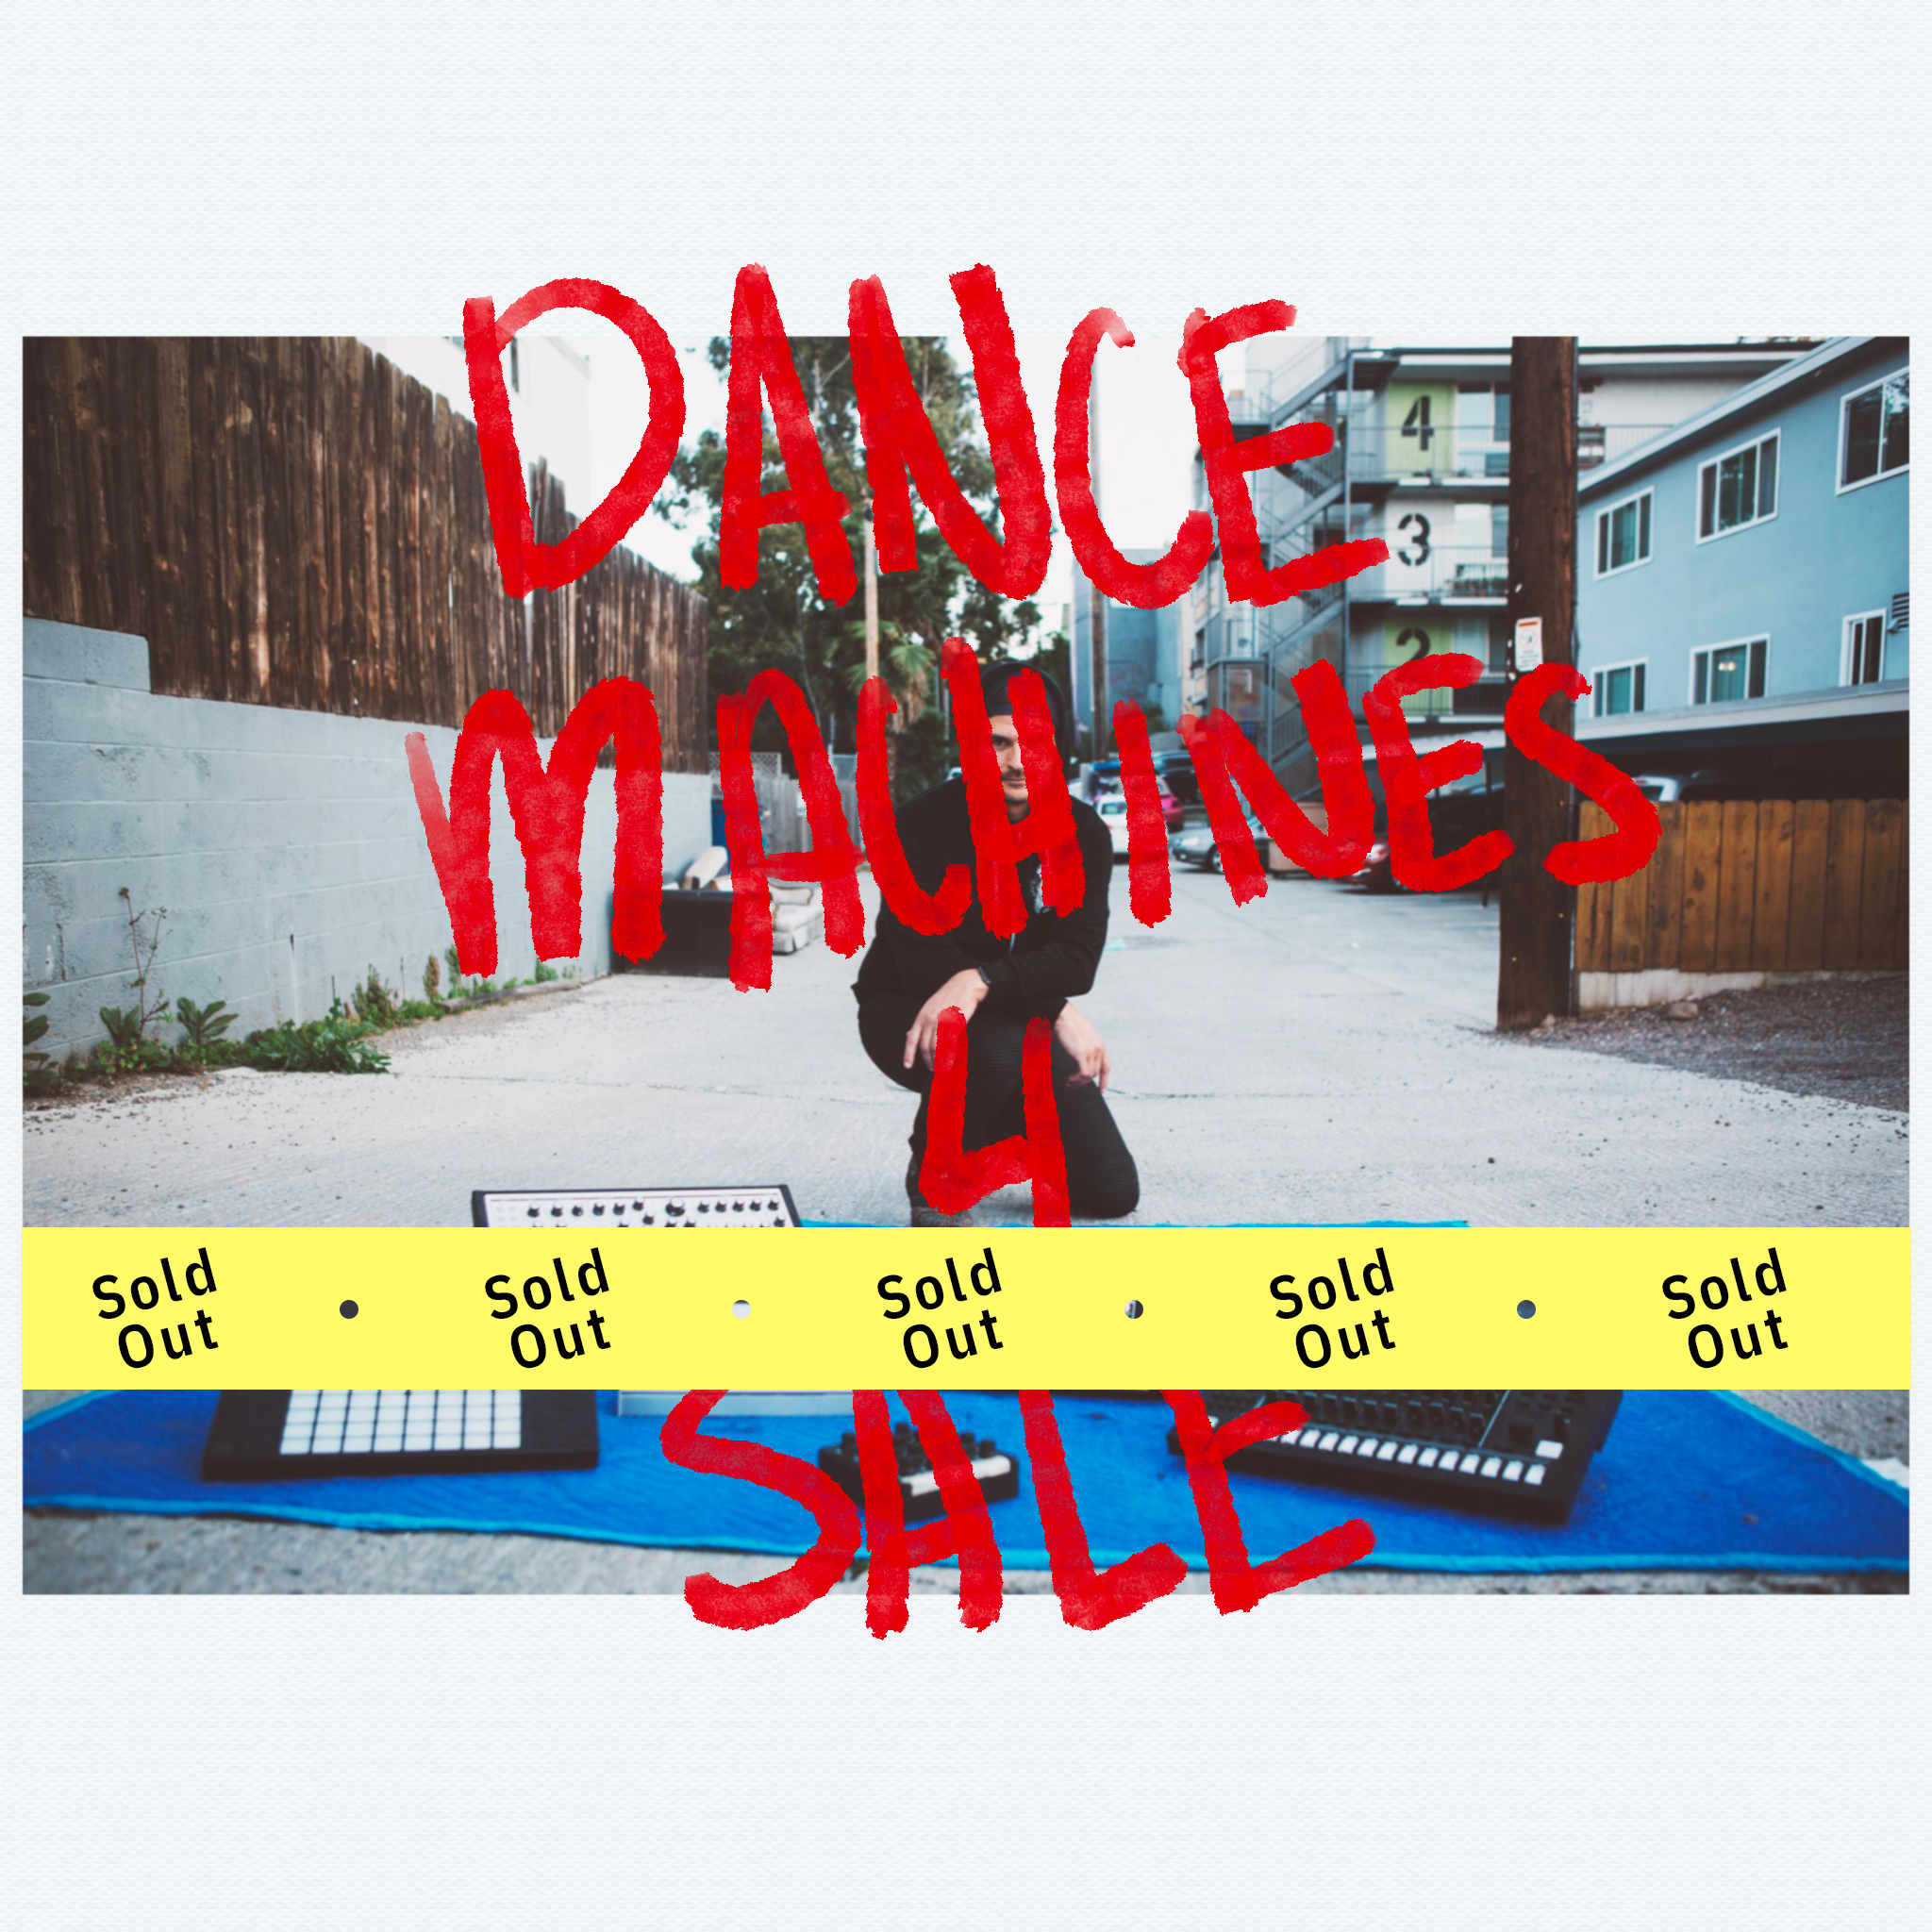 Cover art for Dance Machines (Sold Out) by Bertino Sound & Aesthetic